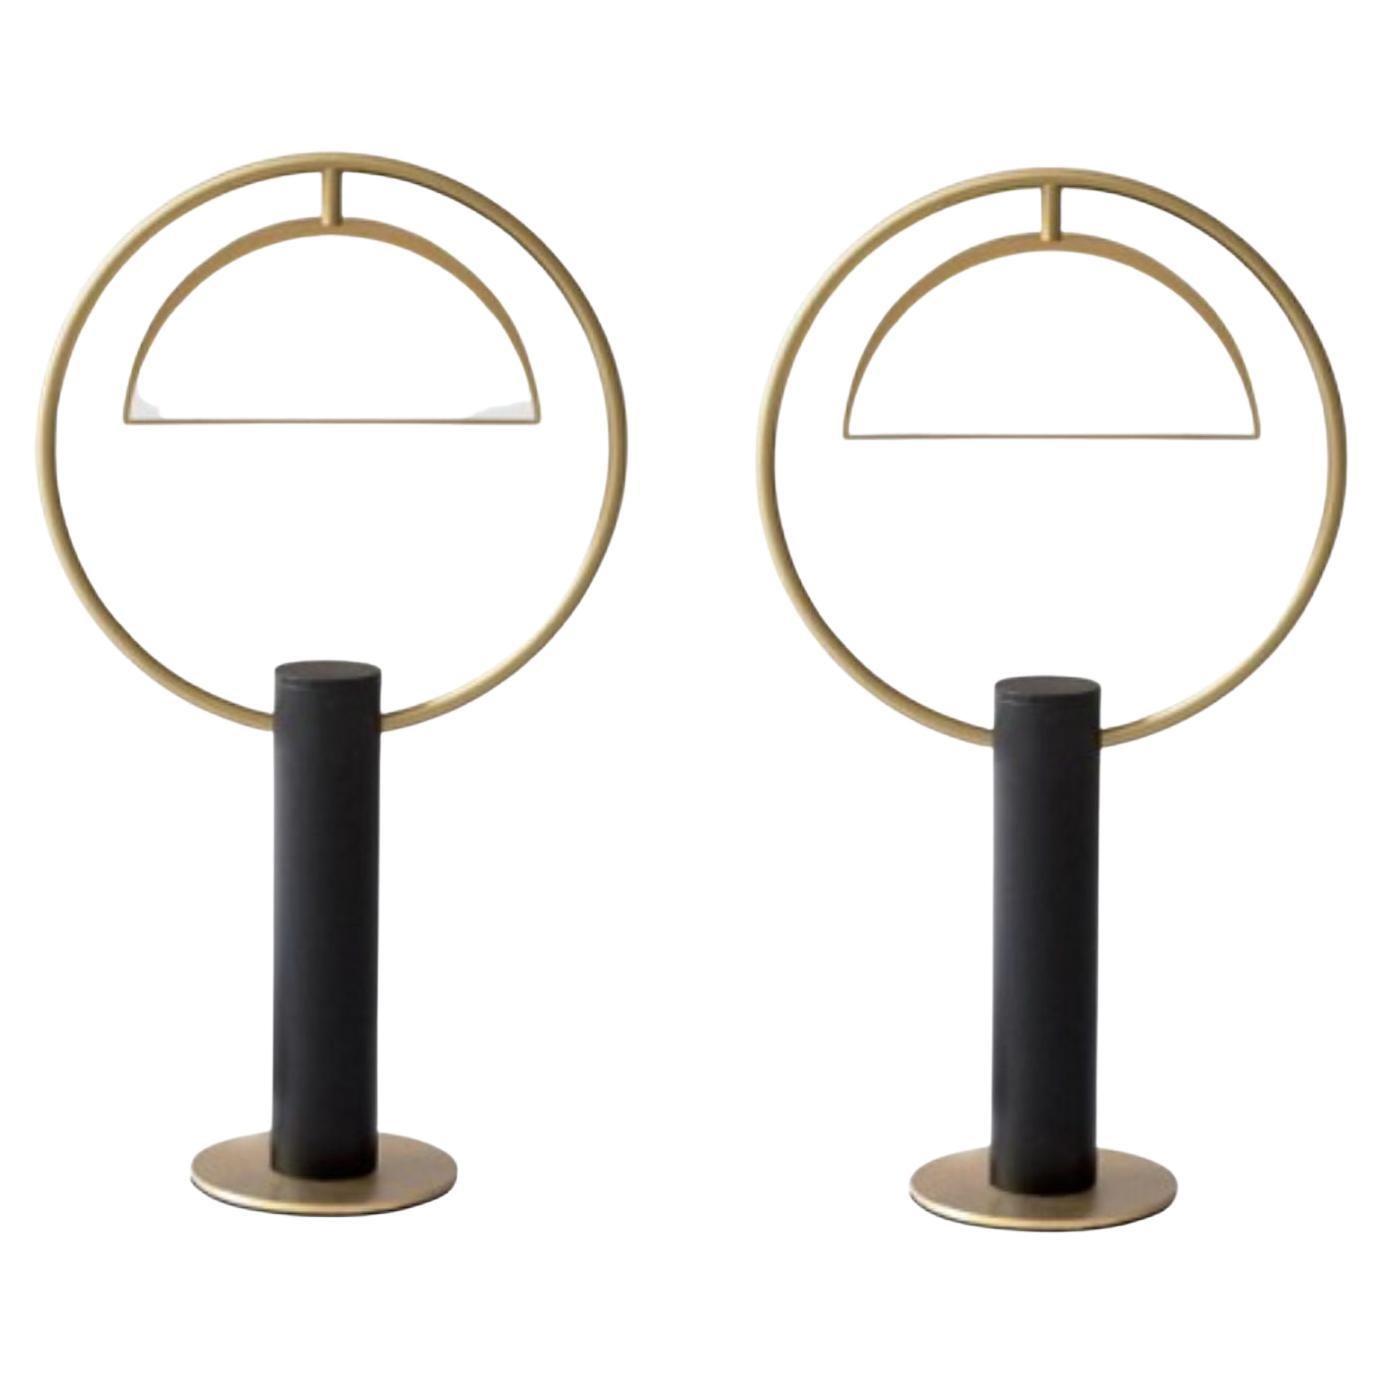 Set of 2 Brass Half in Circle Table Lamps by Square in Circle